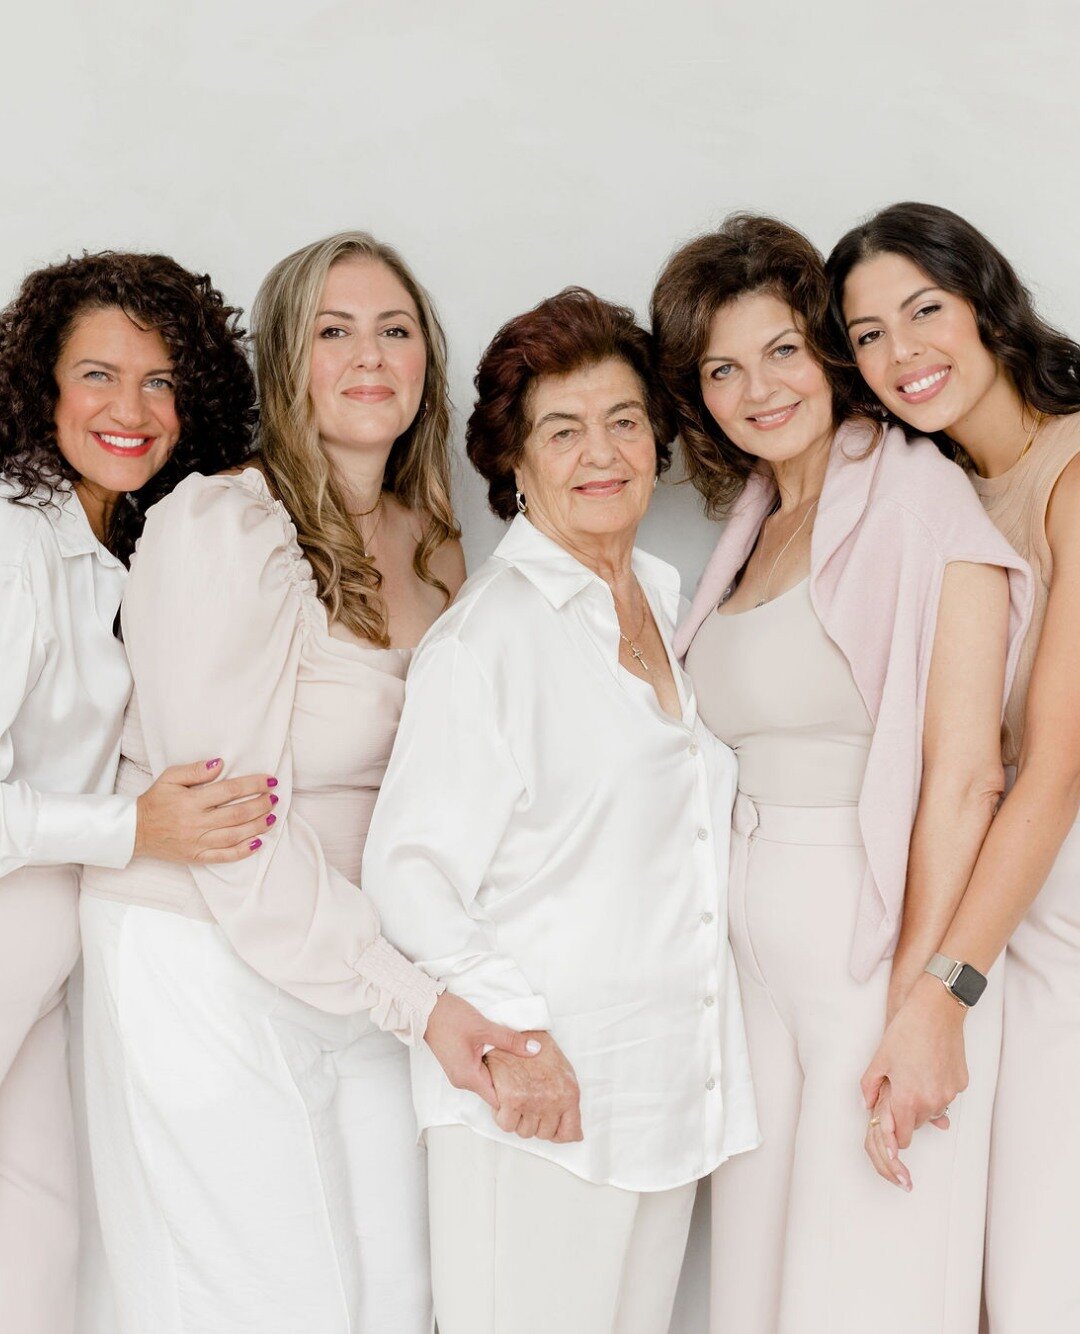 Strong women lift each other up, and the love and support we receive from our family and friends are priceless! As we celebrate Mother's Day this weekend, let's take a moment to appreciate the powerful bond we share with the amazing women in our live